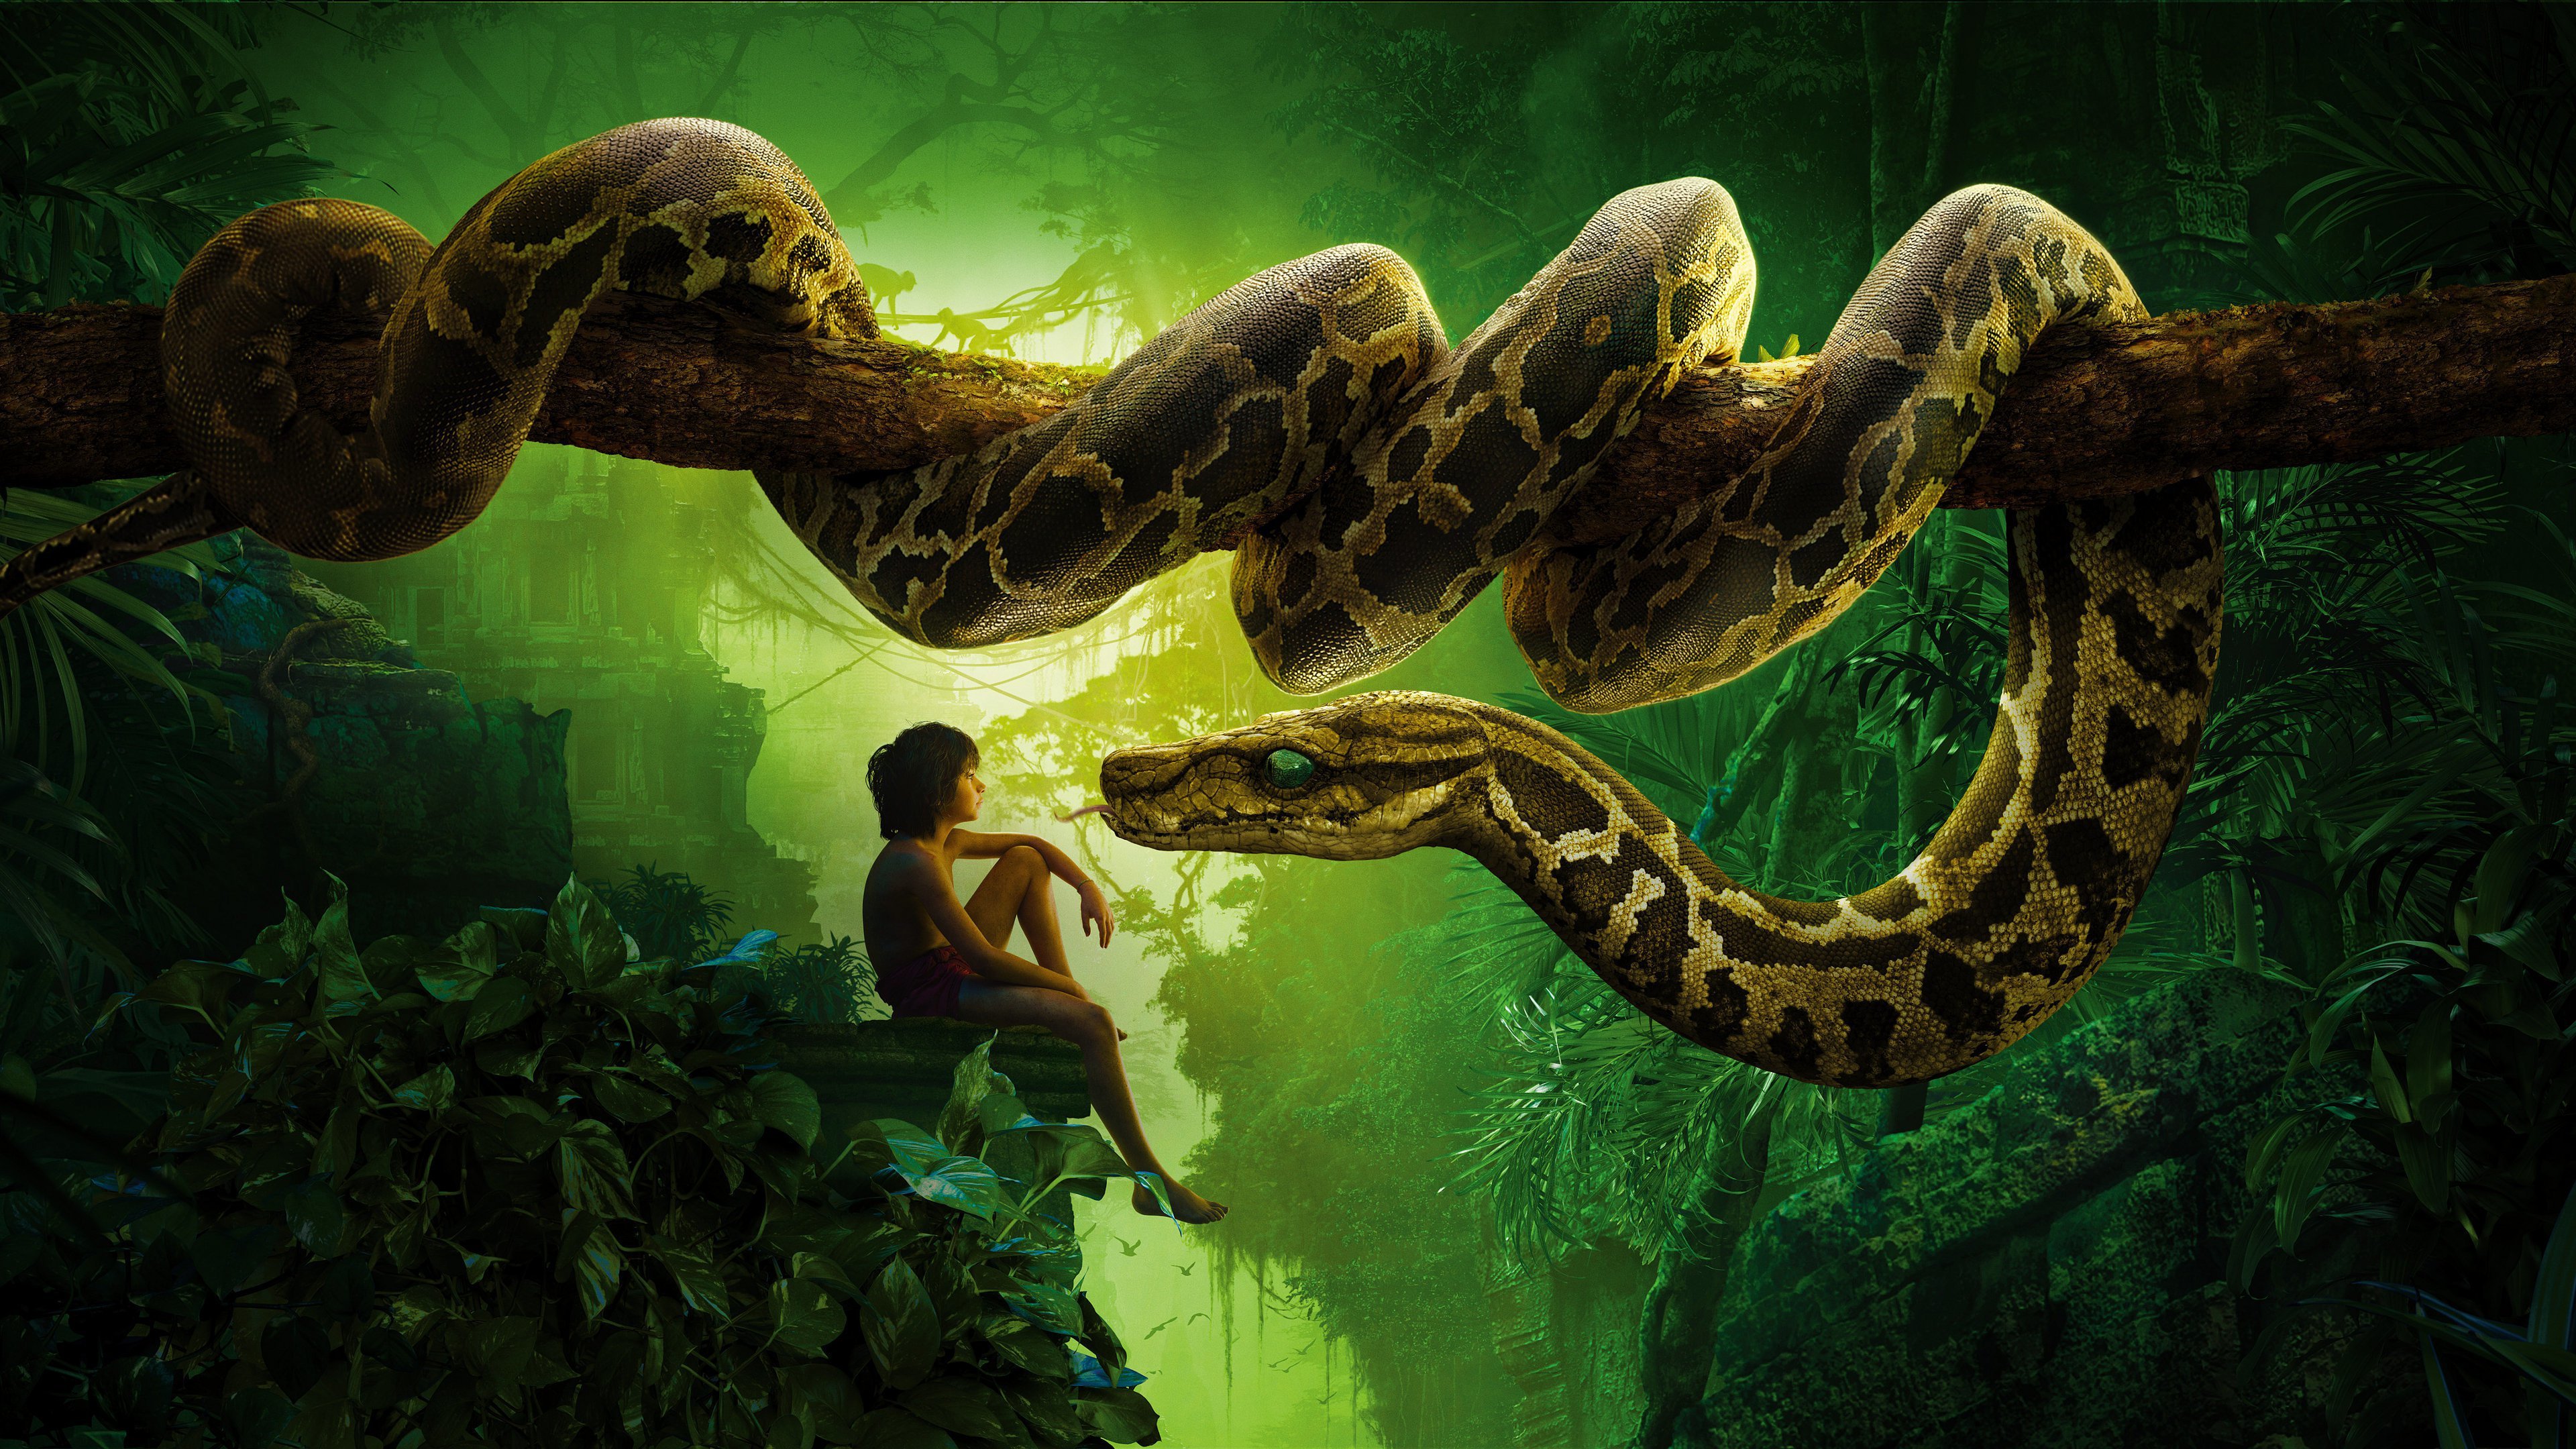 Best The Jungle Book Movie (2016) wallpaper ID:86423 for High Resolution hd 4k PC